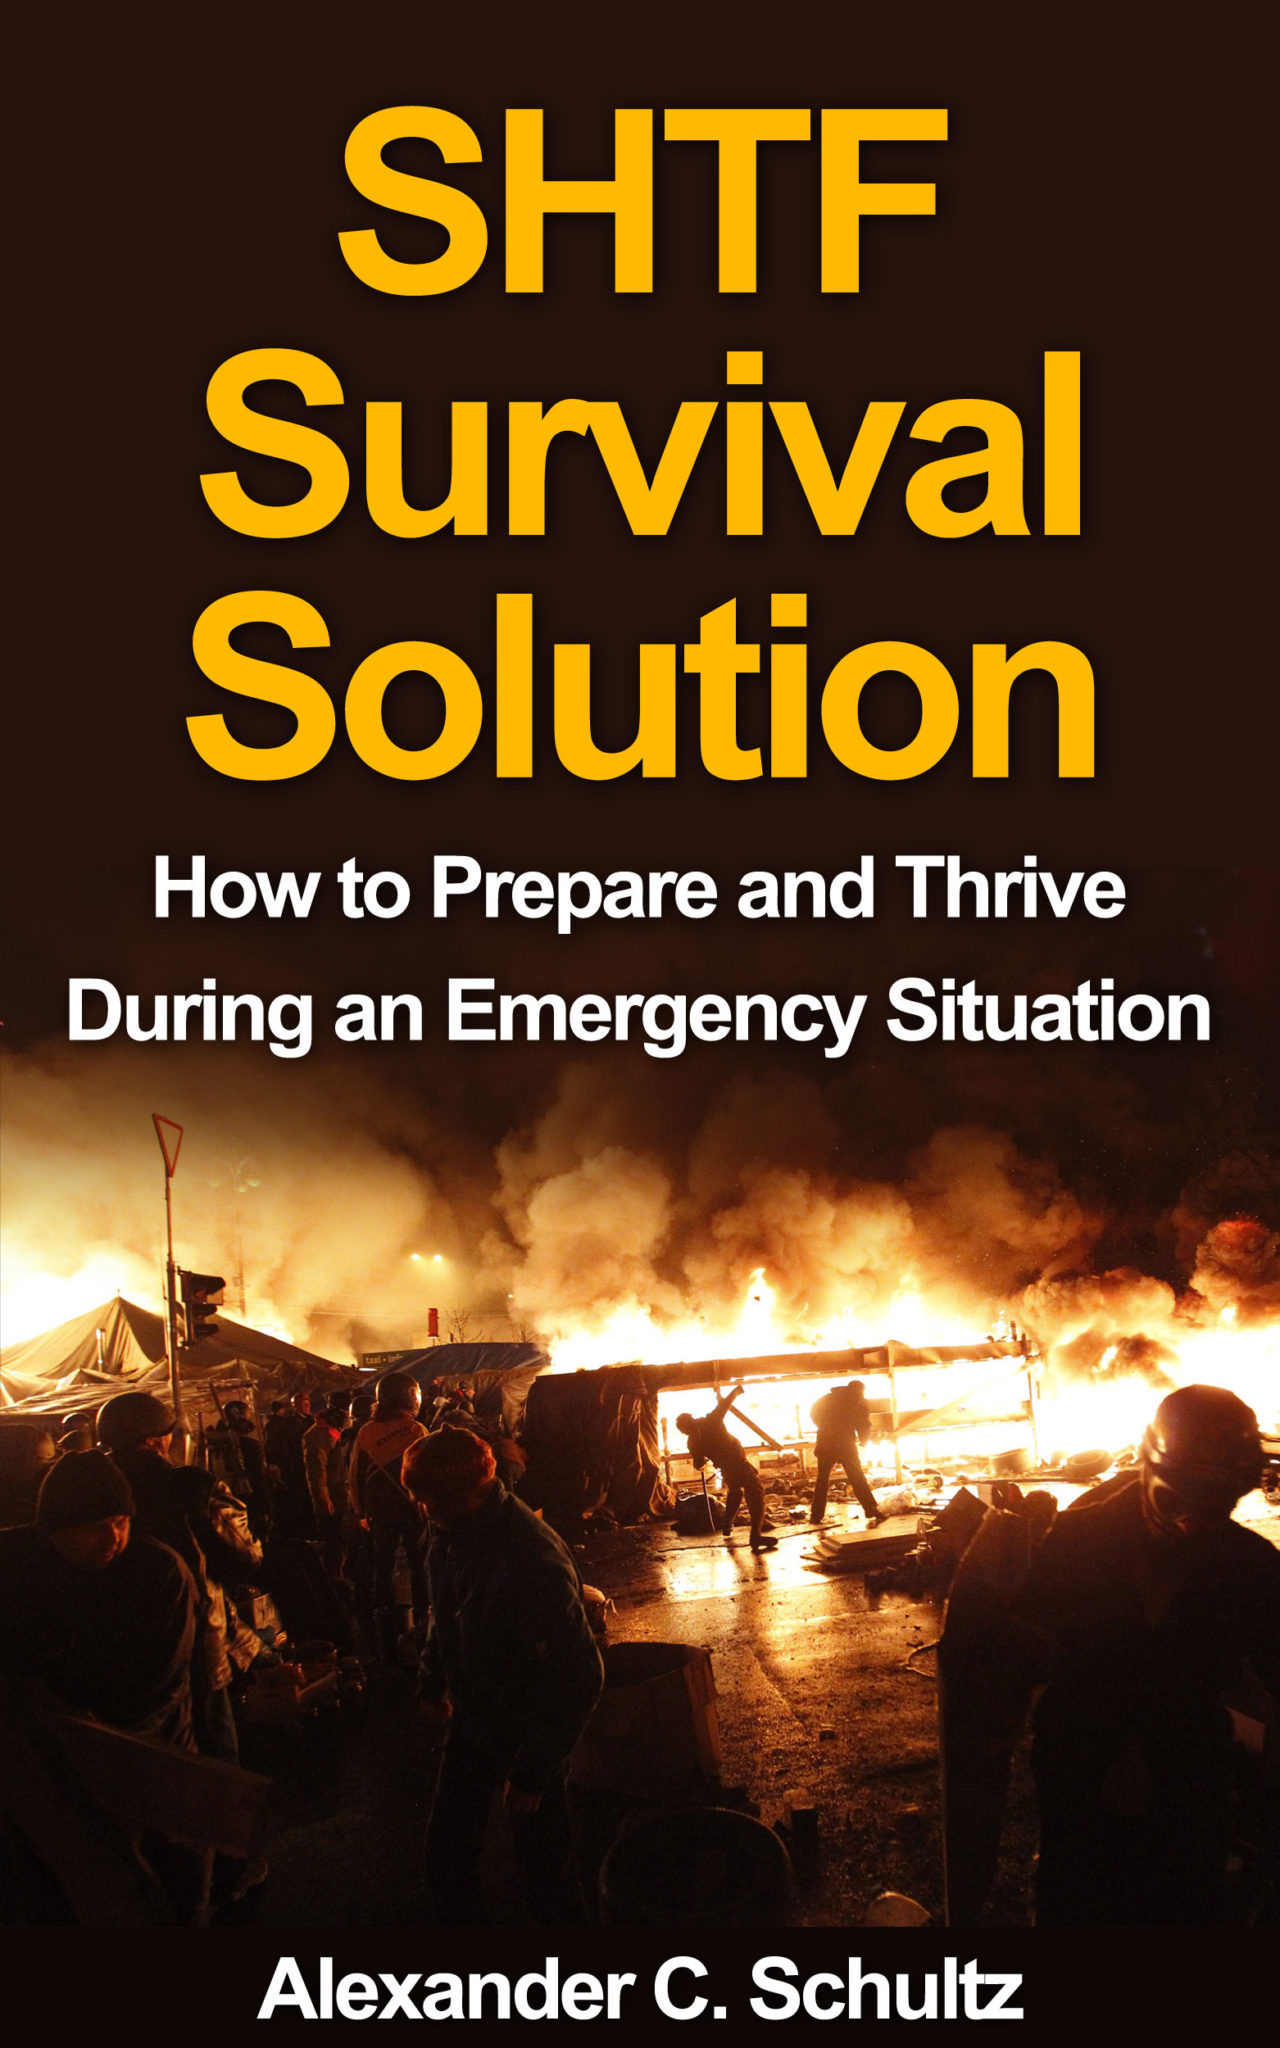 FREE: SHTF Survival Solution – How to Prepare and Thrive During an Emergency Situation by Alexander C. Schultz